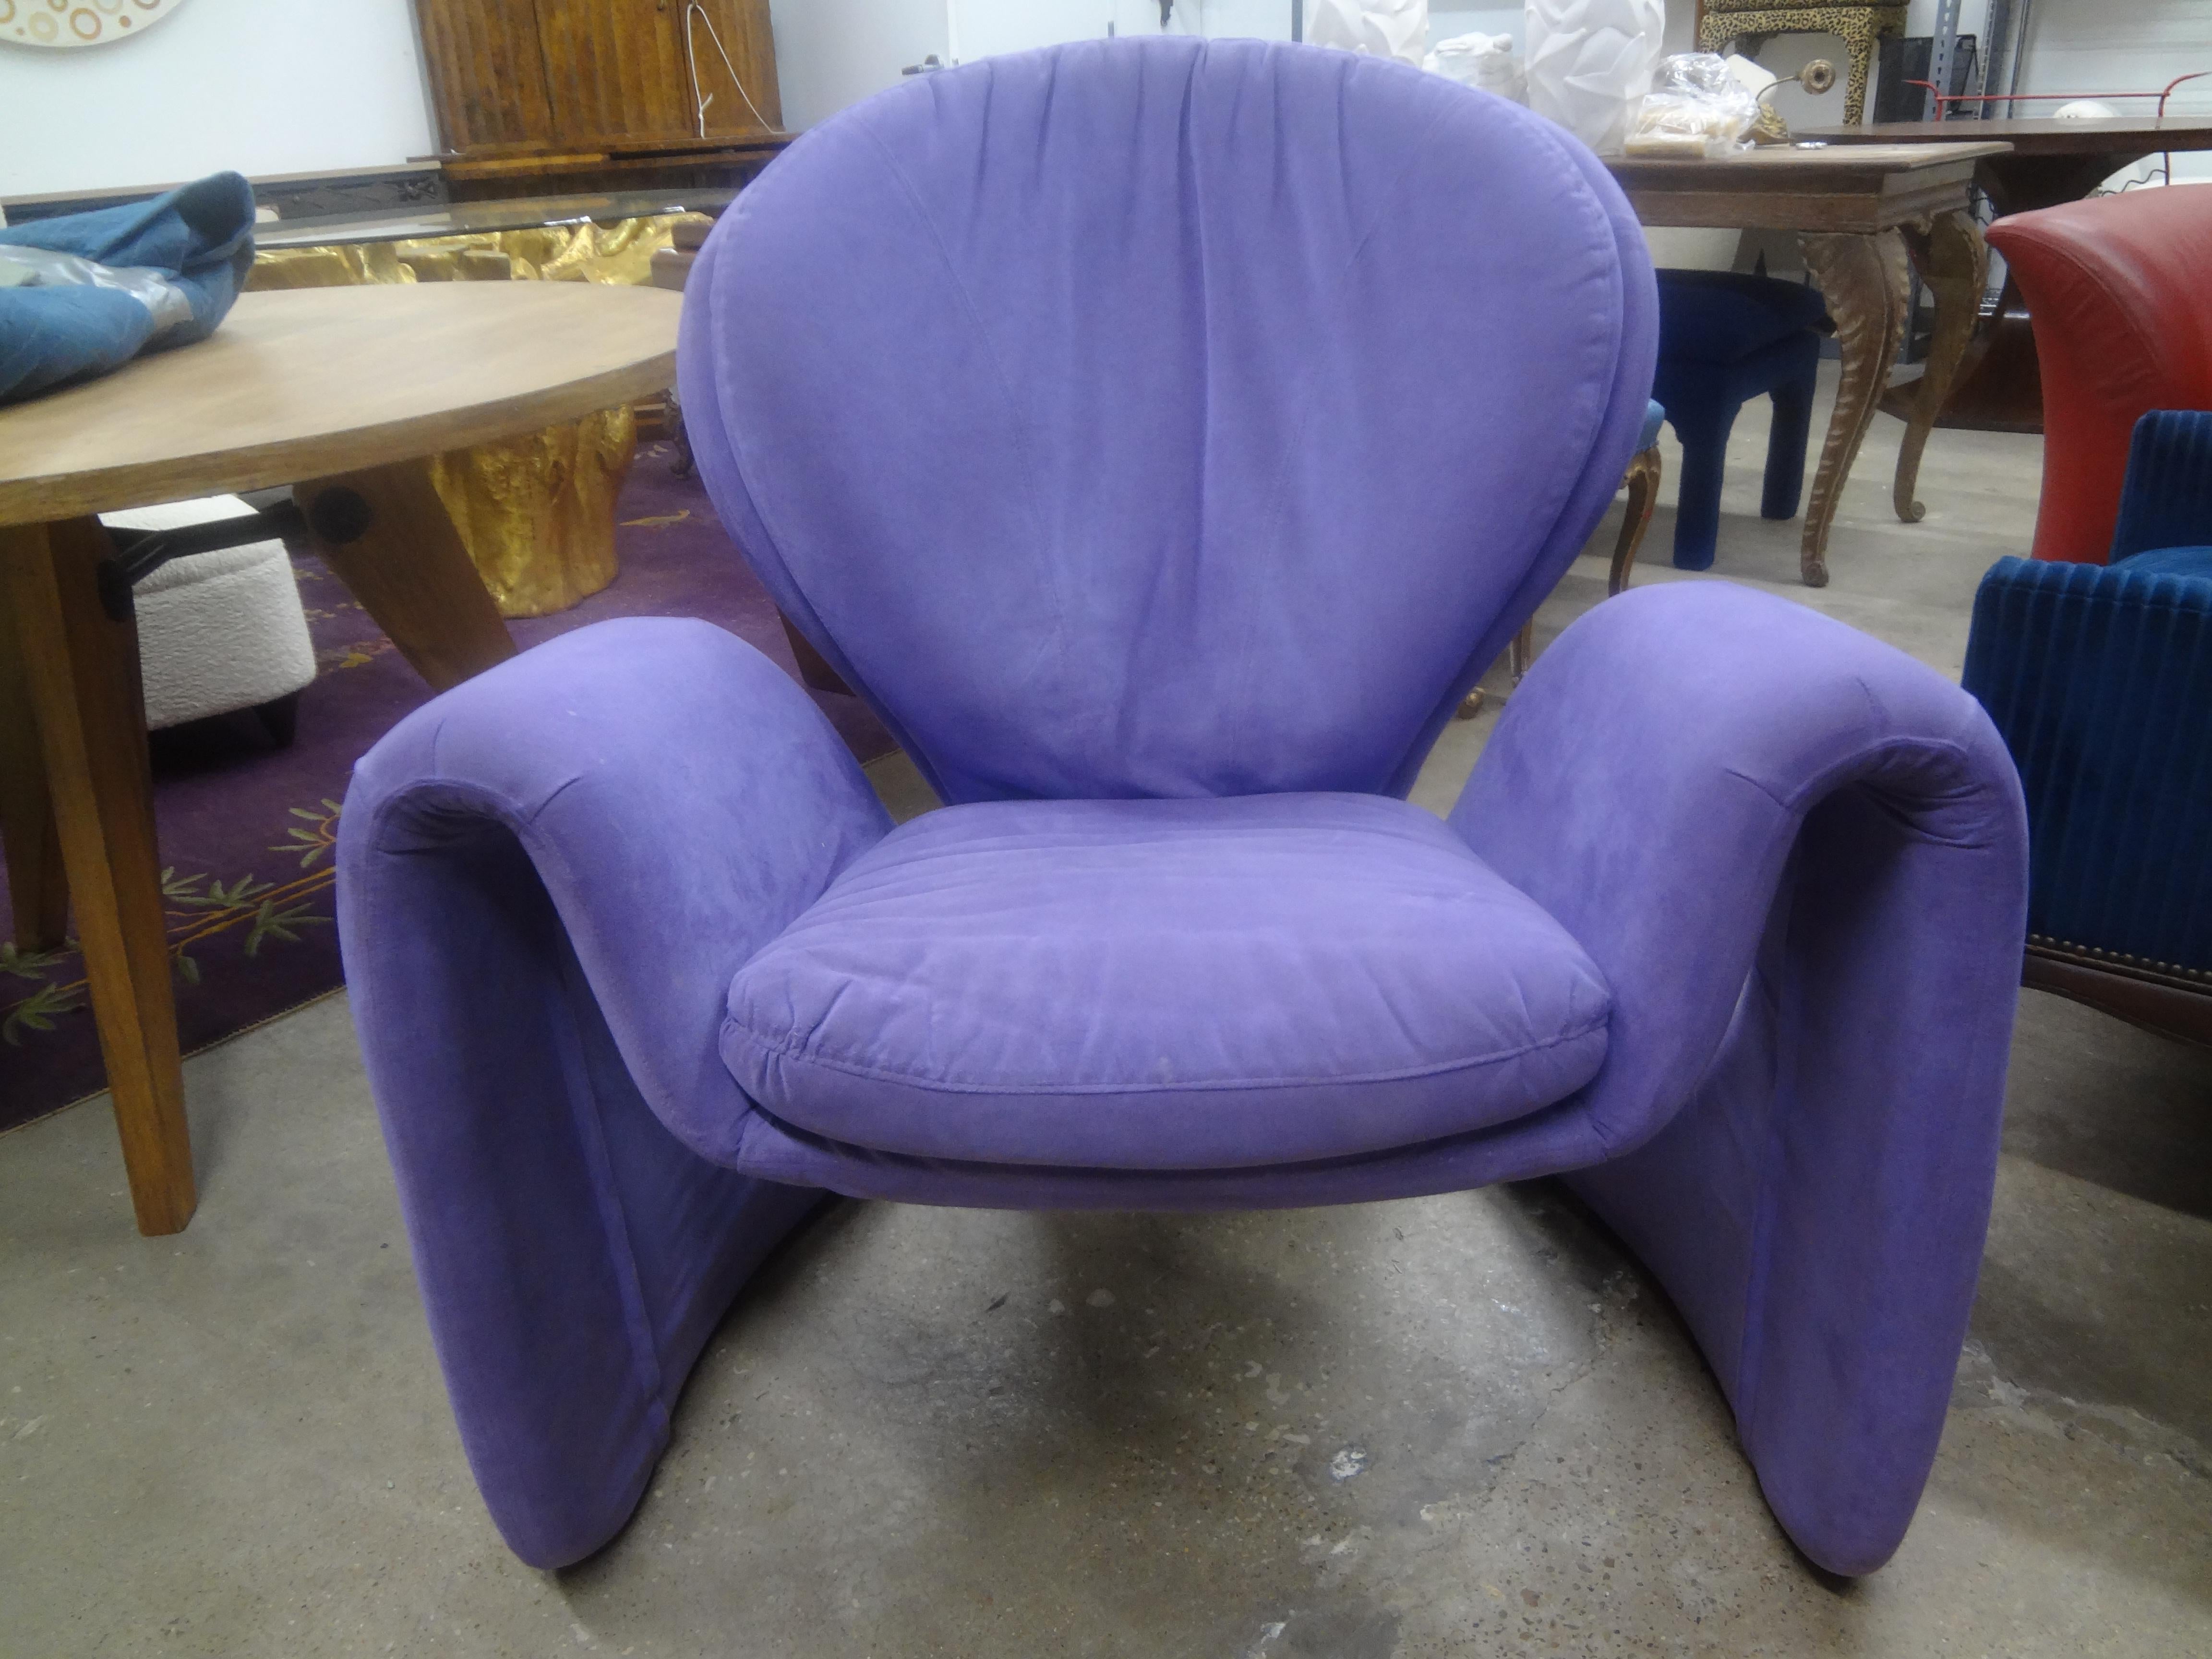 Italian Modern Sculptural Lounge Chair Attributed To Vittorio Introini For Saporiti.
This Postmodern chair, stunning from every angle is most comfortable and has been attributed to Olivier Mourgue. It retains the original lavender ultrasuede fabric